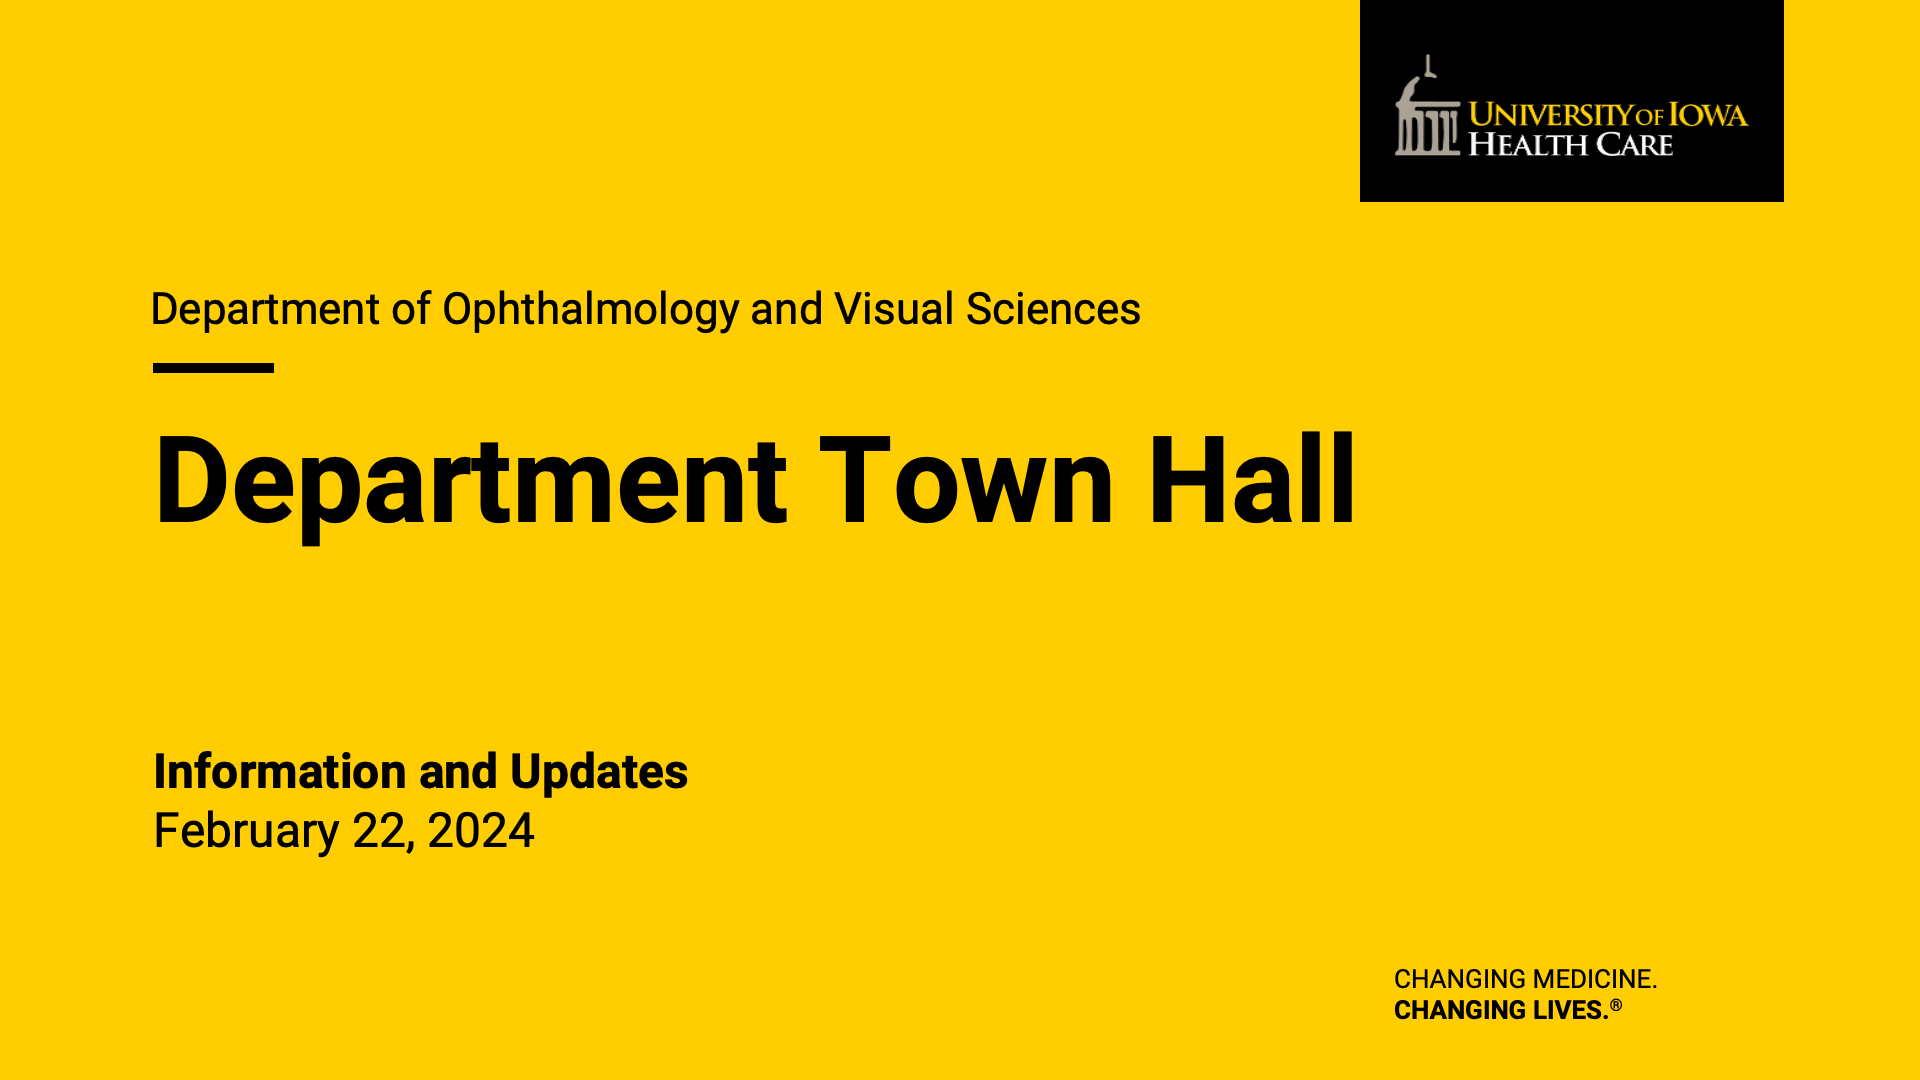 Town Hall graphic